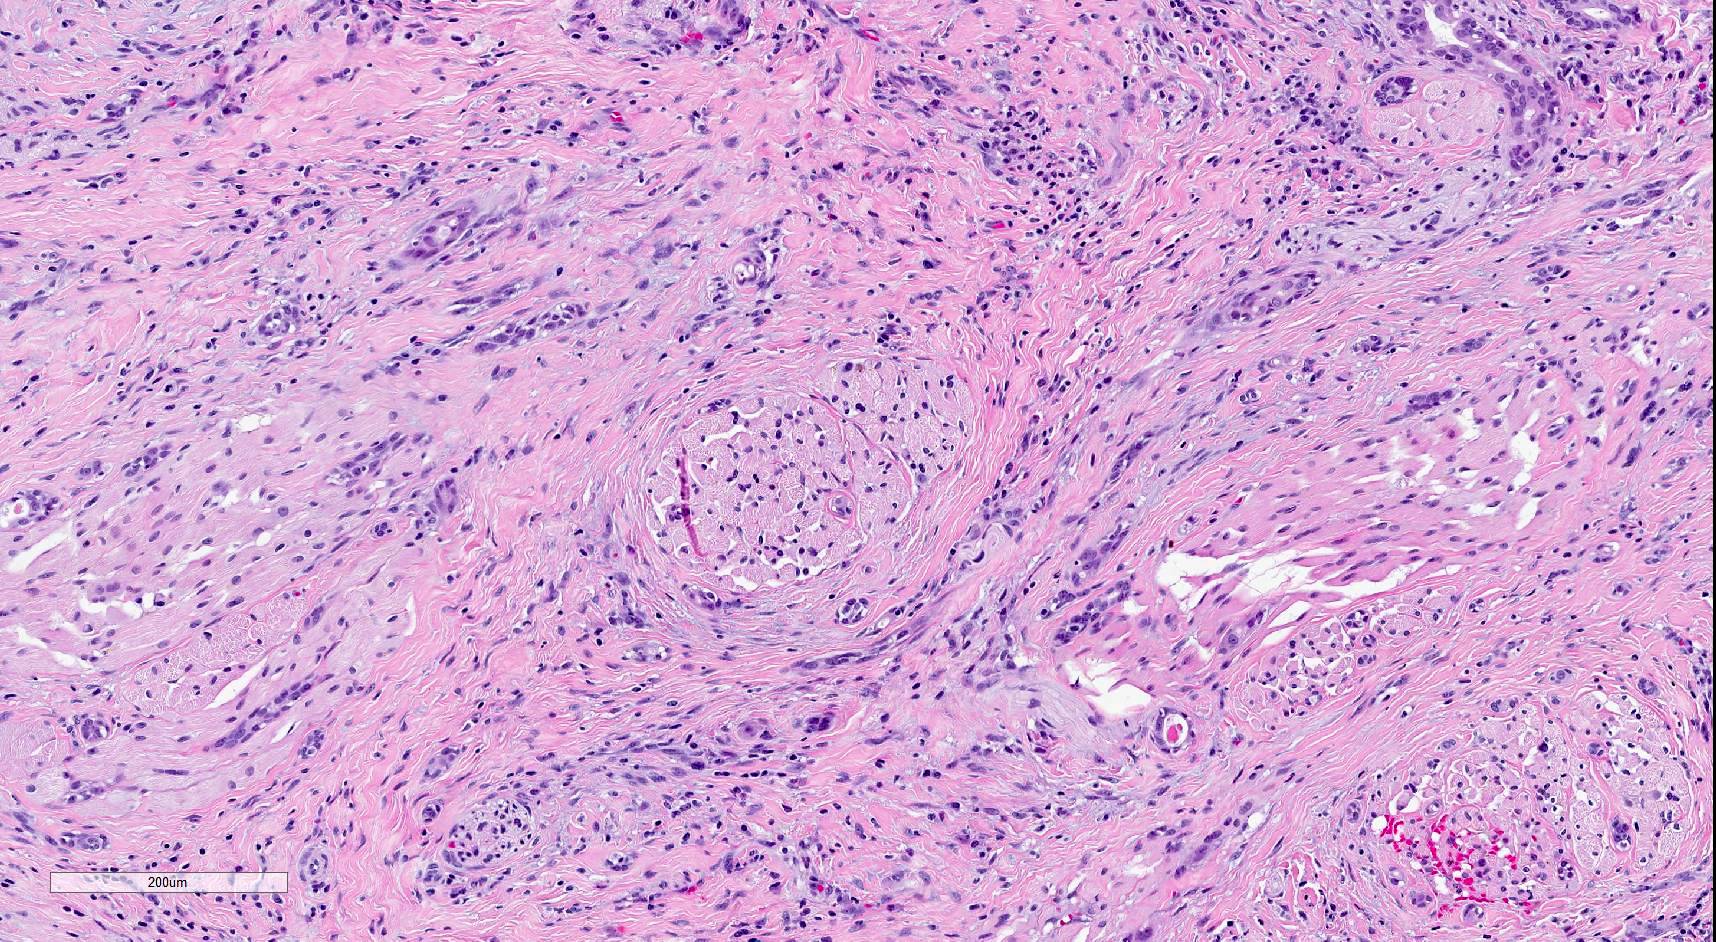 Infiltrative tubules and poorly formed glands